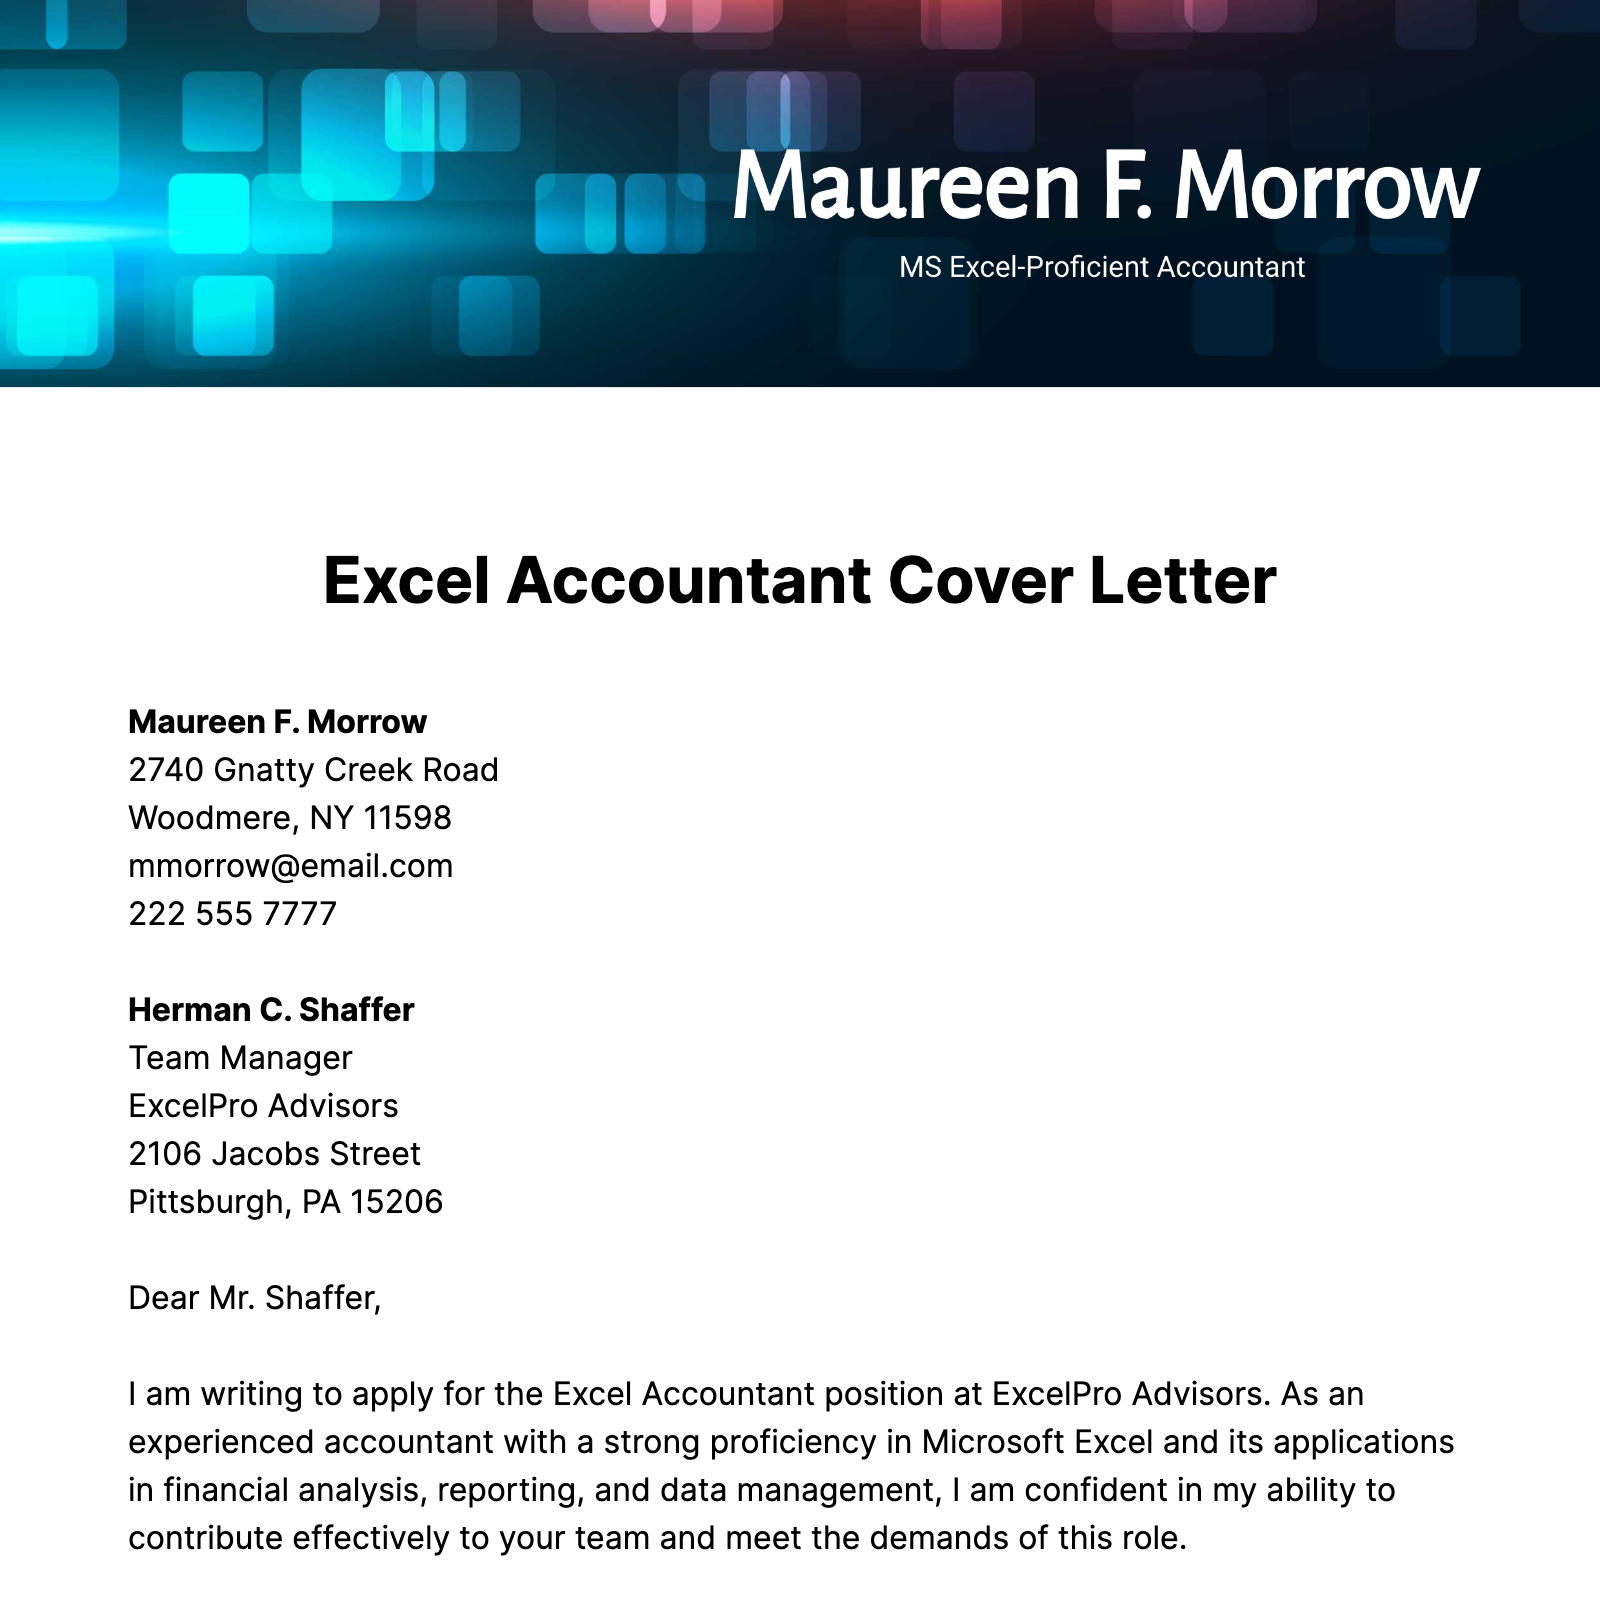 Excel Accountant Cover Letter Template